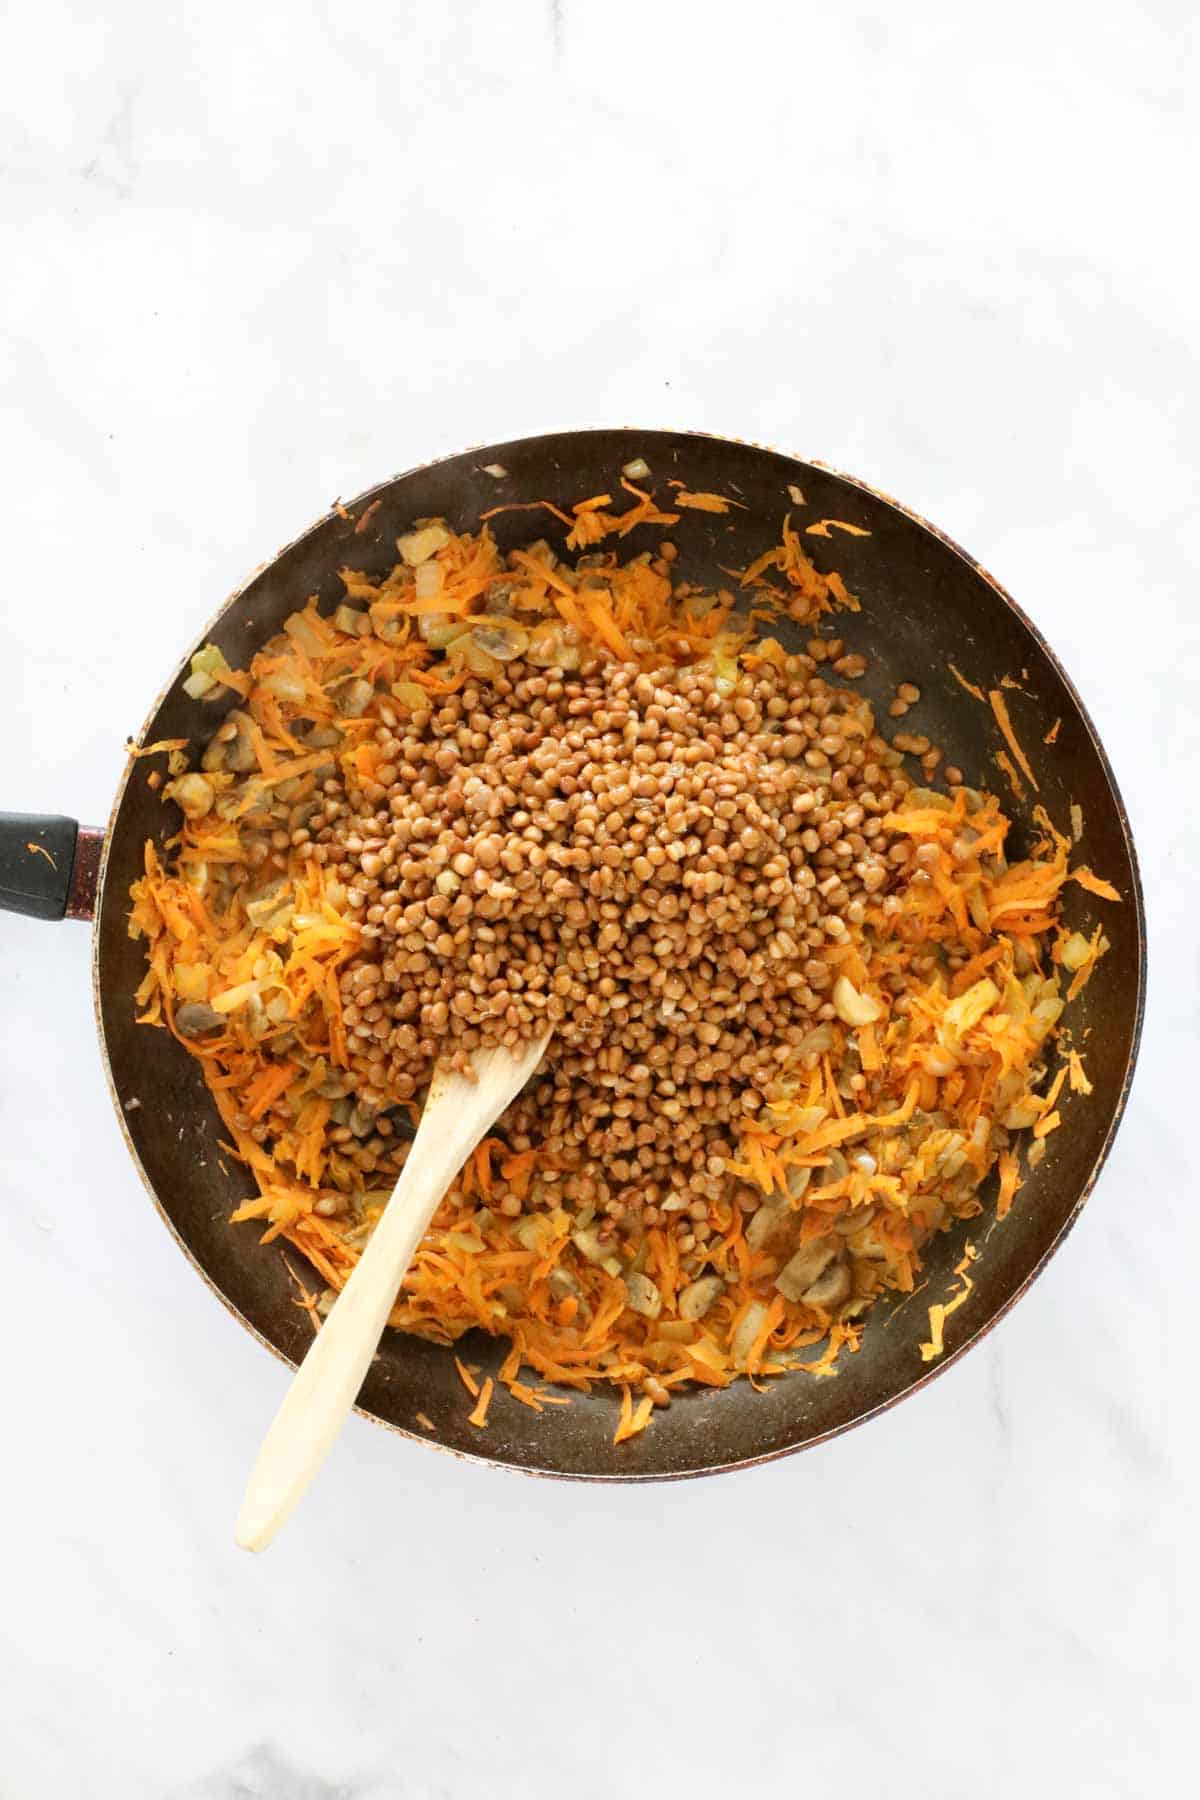 Lentils and soy sauce added to the cooked vegetables in a frying pan.